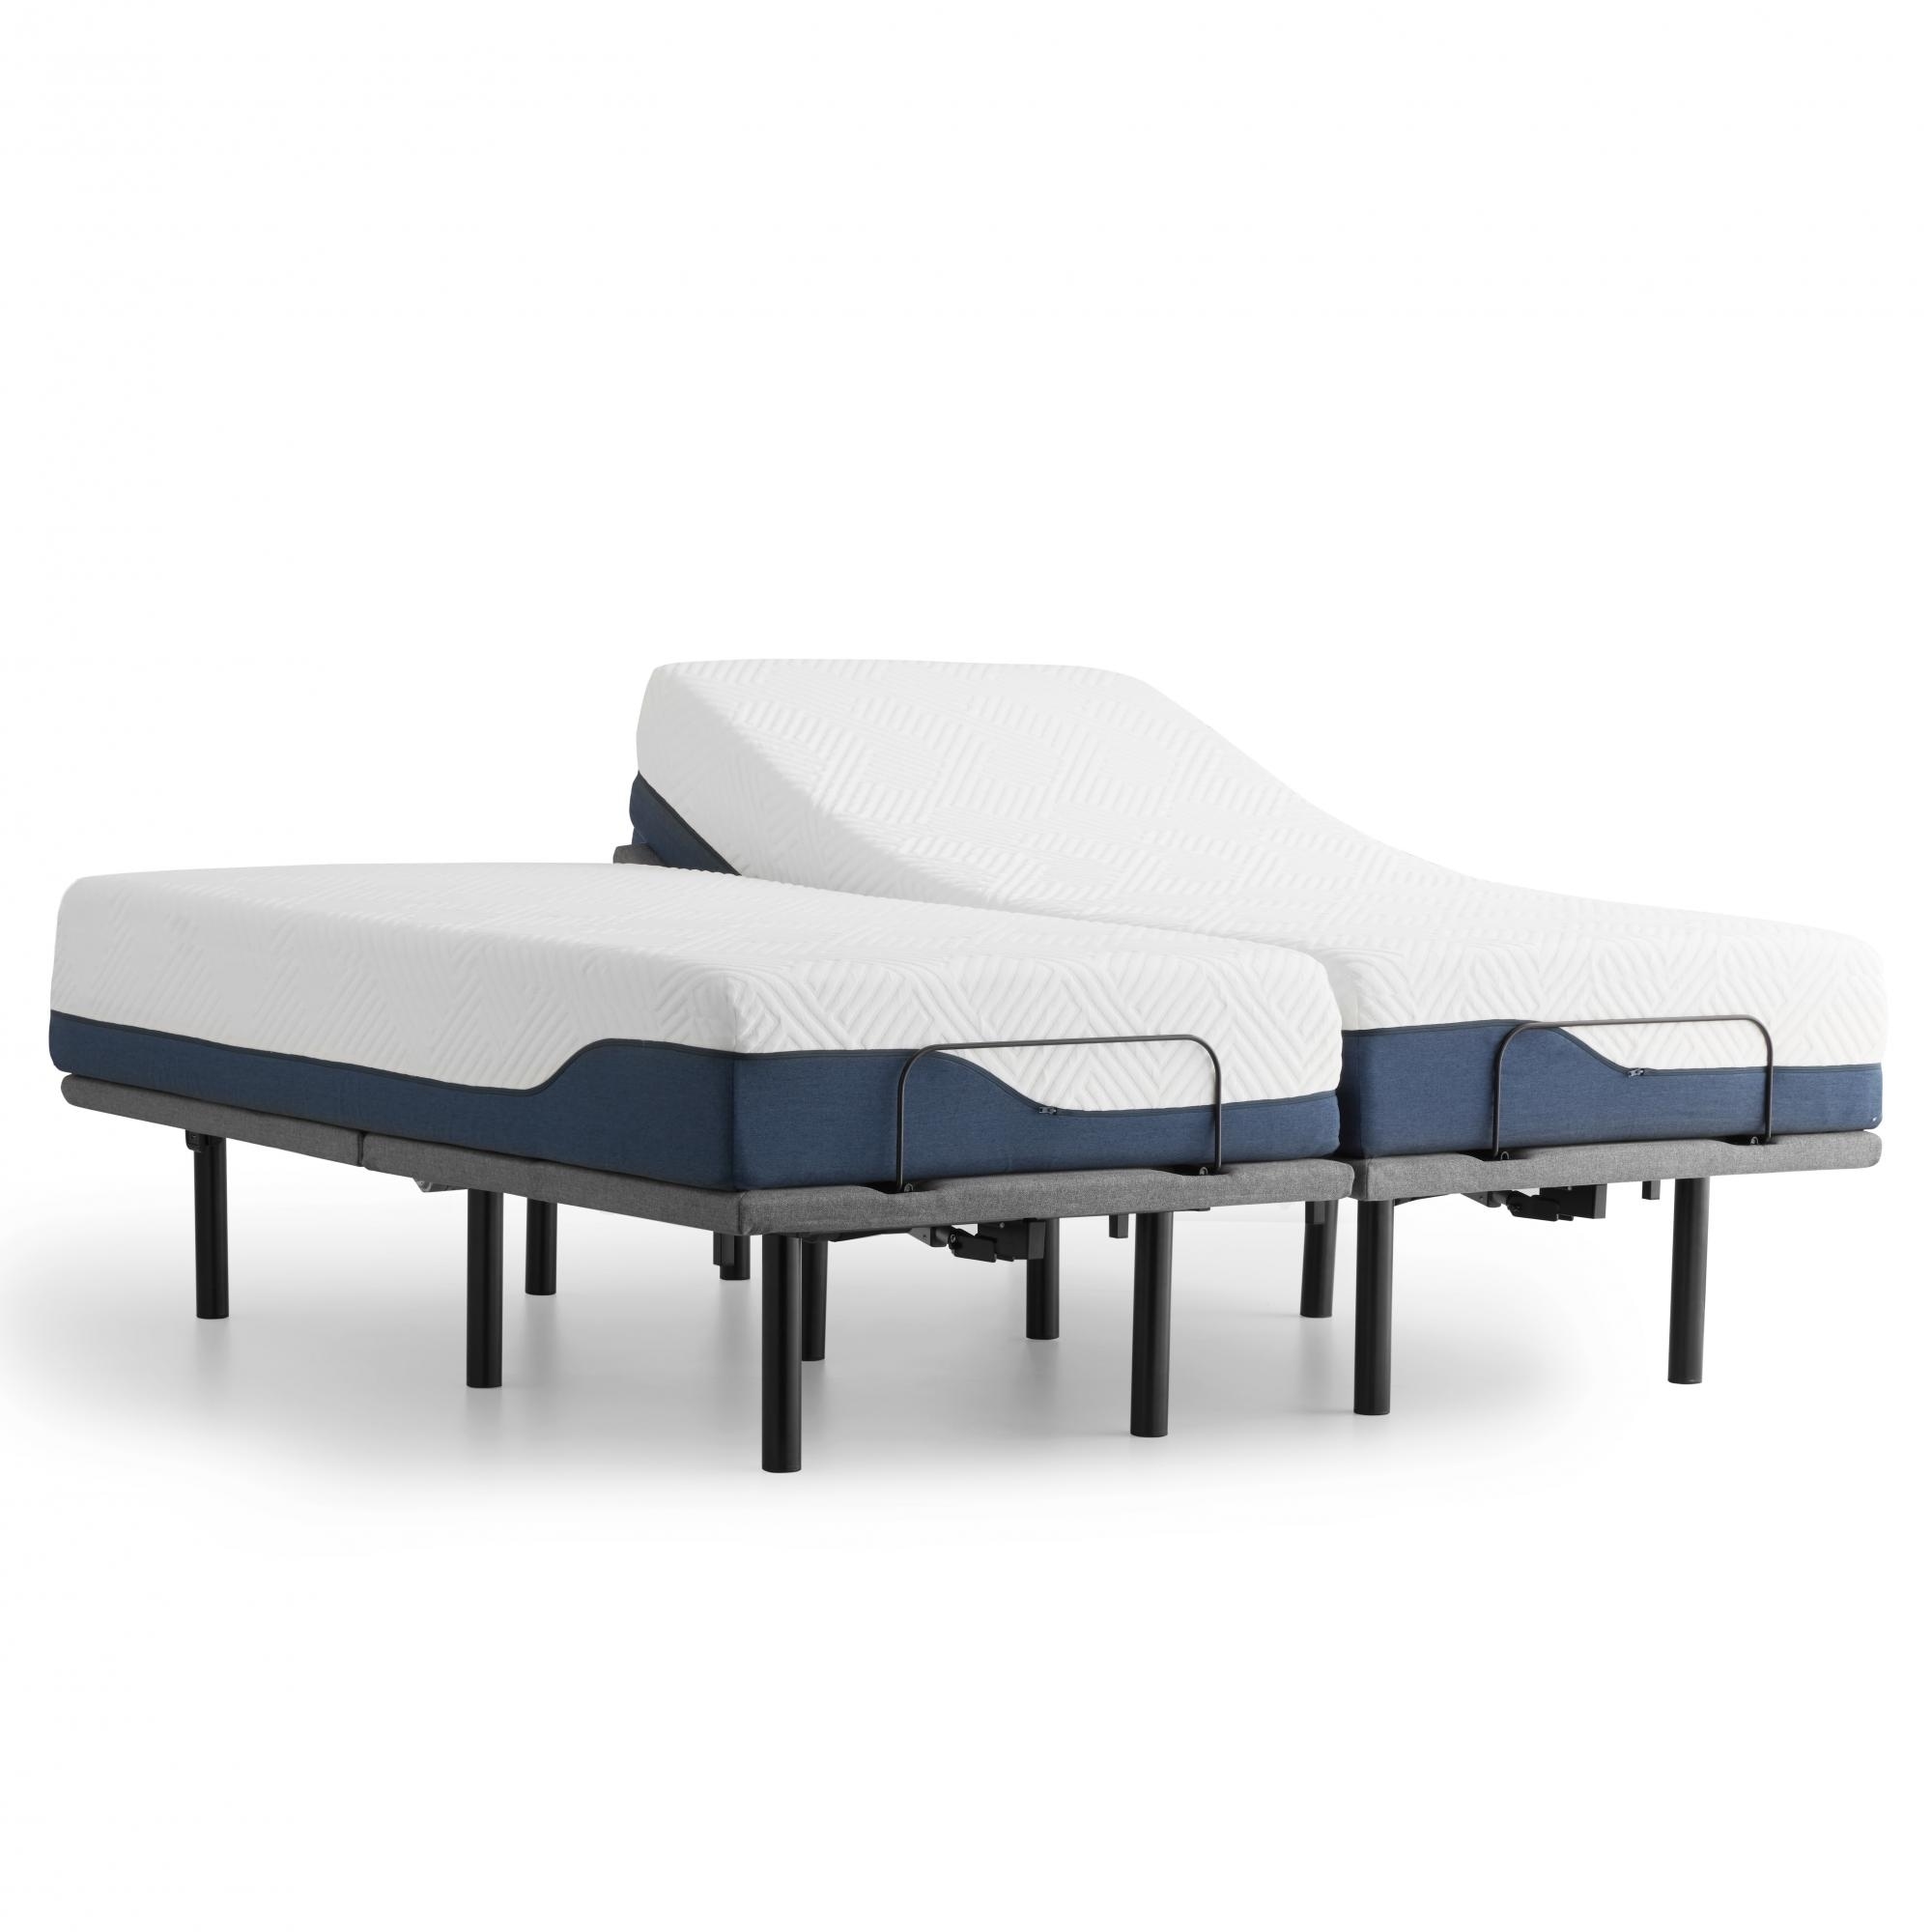 Lucid Comfort Collection Full Advanced Bed Base with Wireless